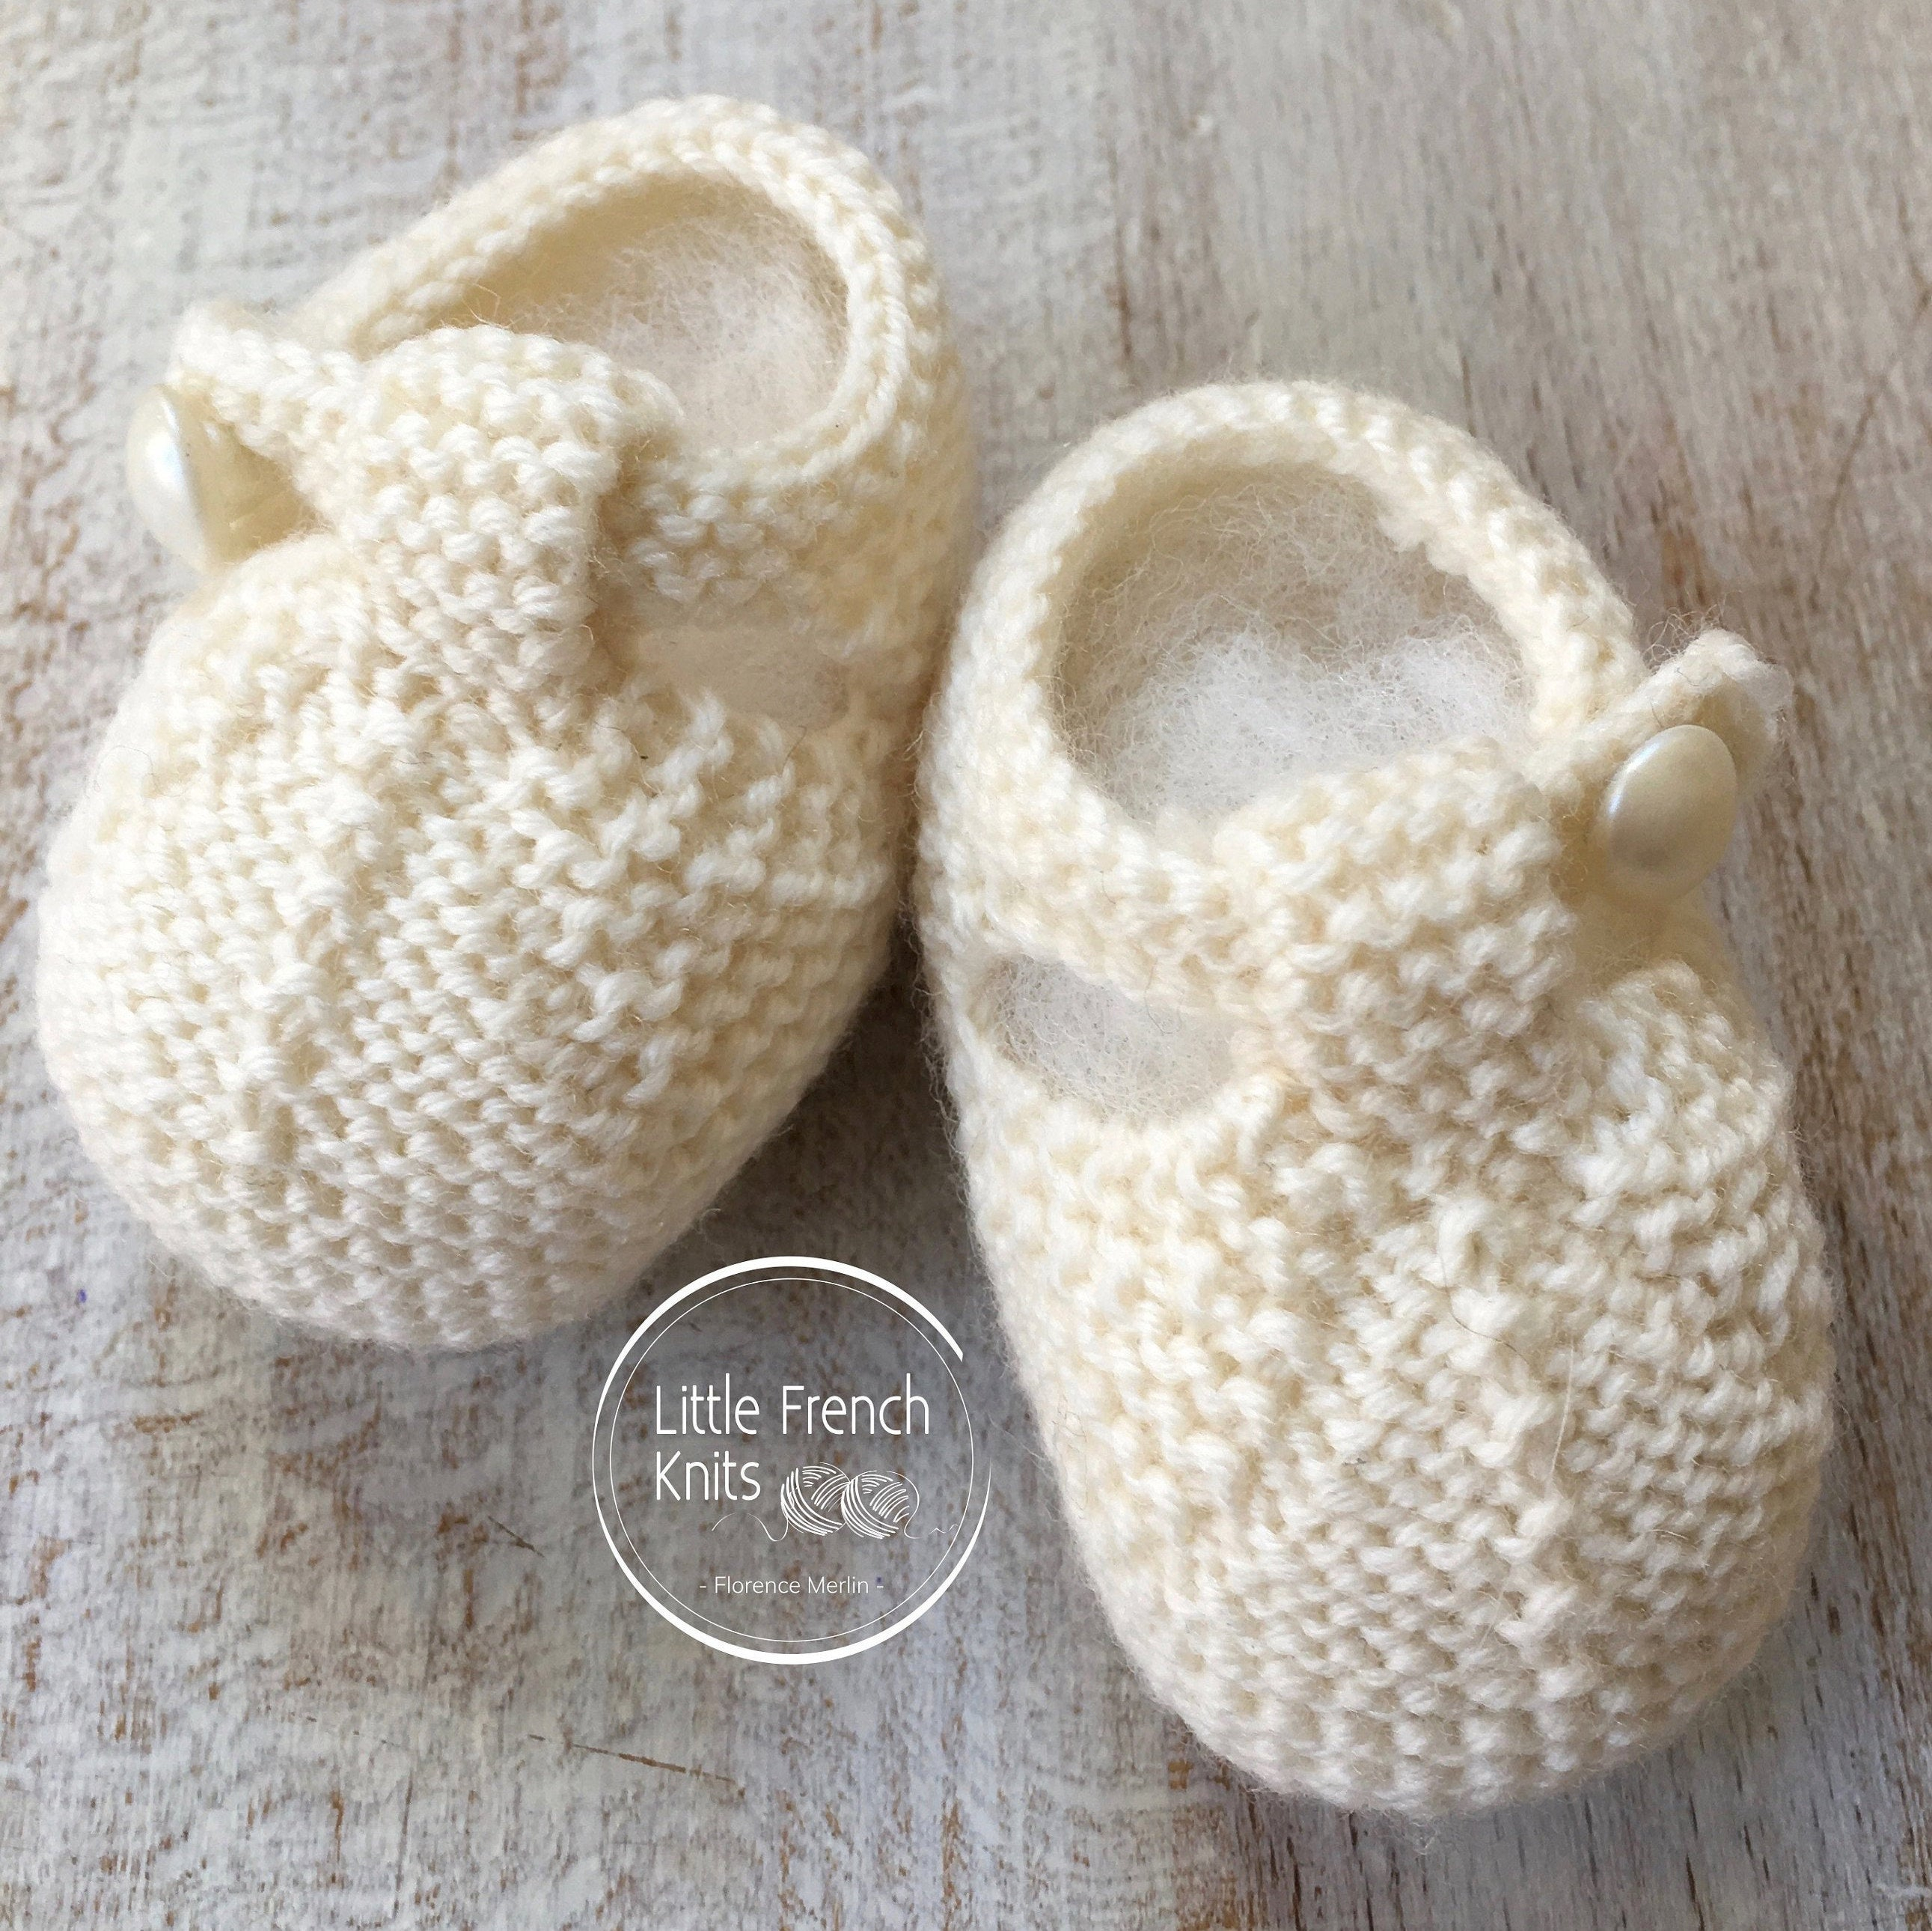 Knitting Patterns For Baby Booties Knitting Pattern Ba Booties Instructions In English Instant Digital